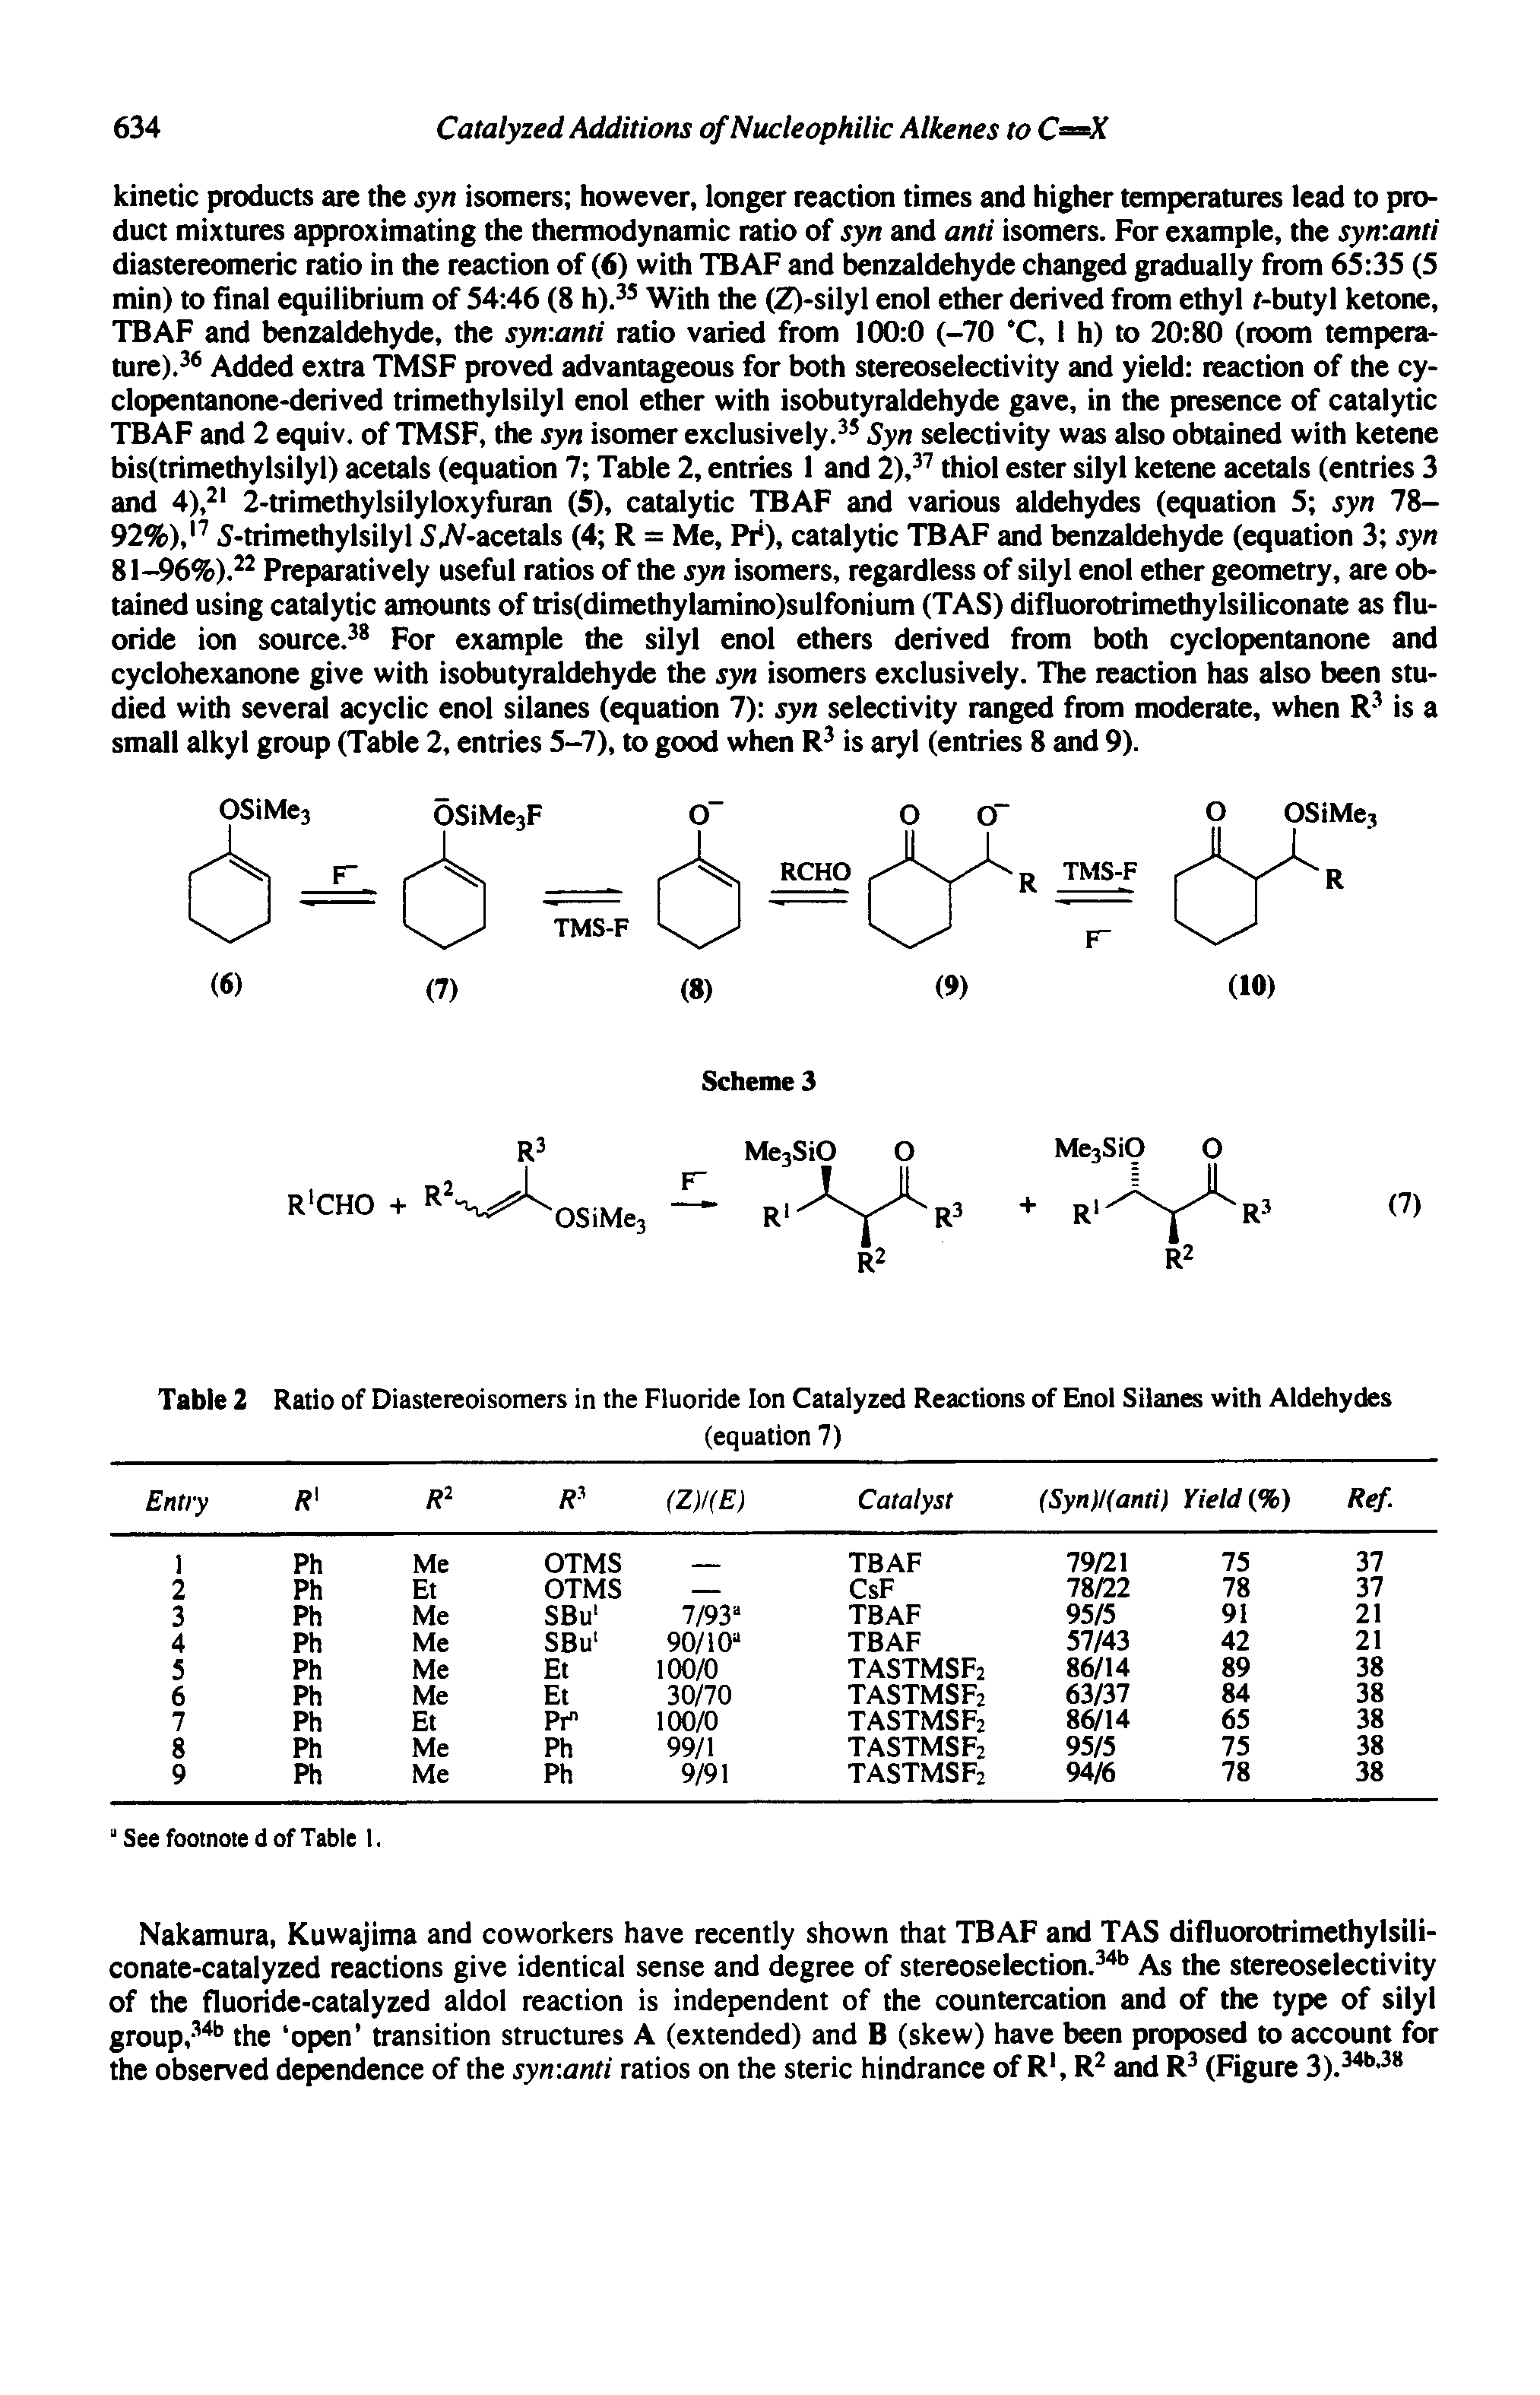 Table 2 Ratio of Diastereoisomers in the Fluoride Ion Catalyzed Reactions of Enol Silanes with Aldehydes...